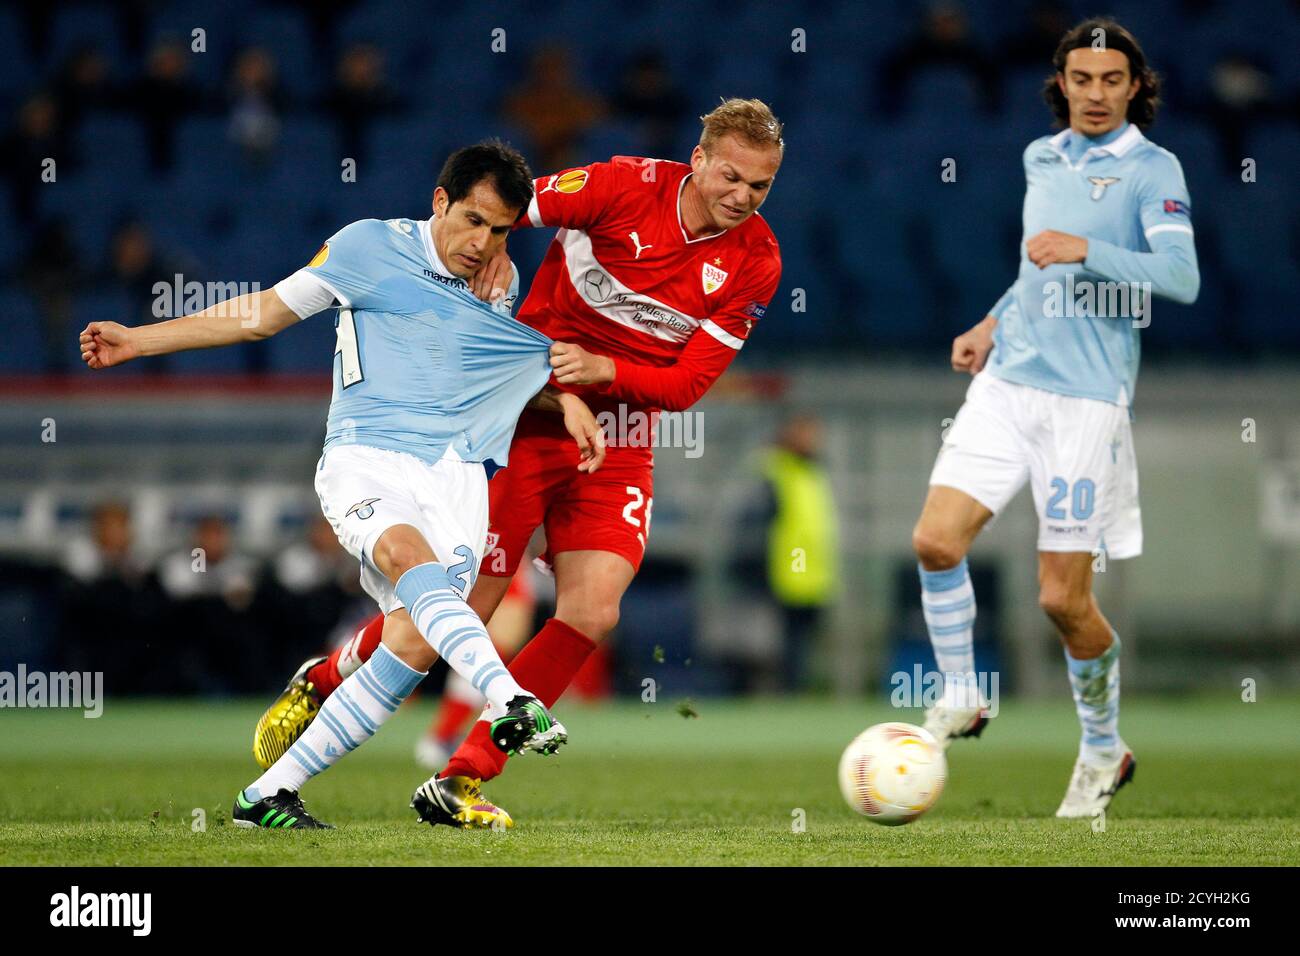 VfB Stuttgart's Raphael Holzhauser (C) challenges Lazio's Cristian Ledesma (L) as Giuseppe Biava (R) watches during their Europa League soccer match at the Olympic stadium in Rome March 14, 2013. REUTERS/Giampiero Sposito (ITALY - Tags: SPORT SOCCER) Stock Photo